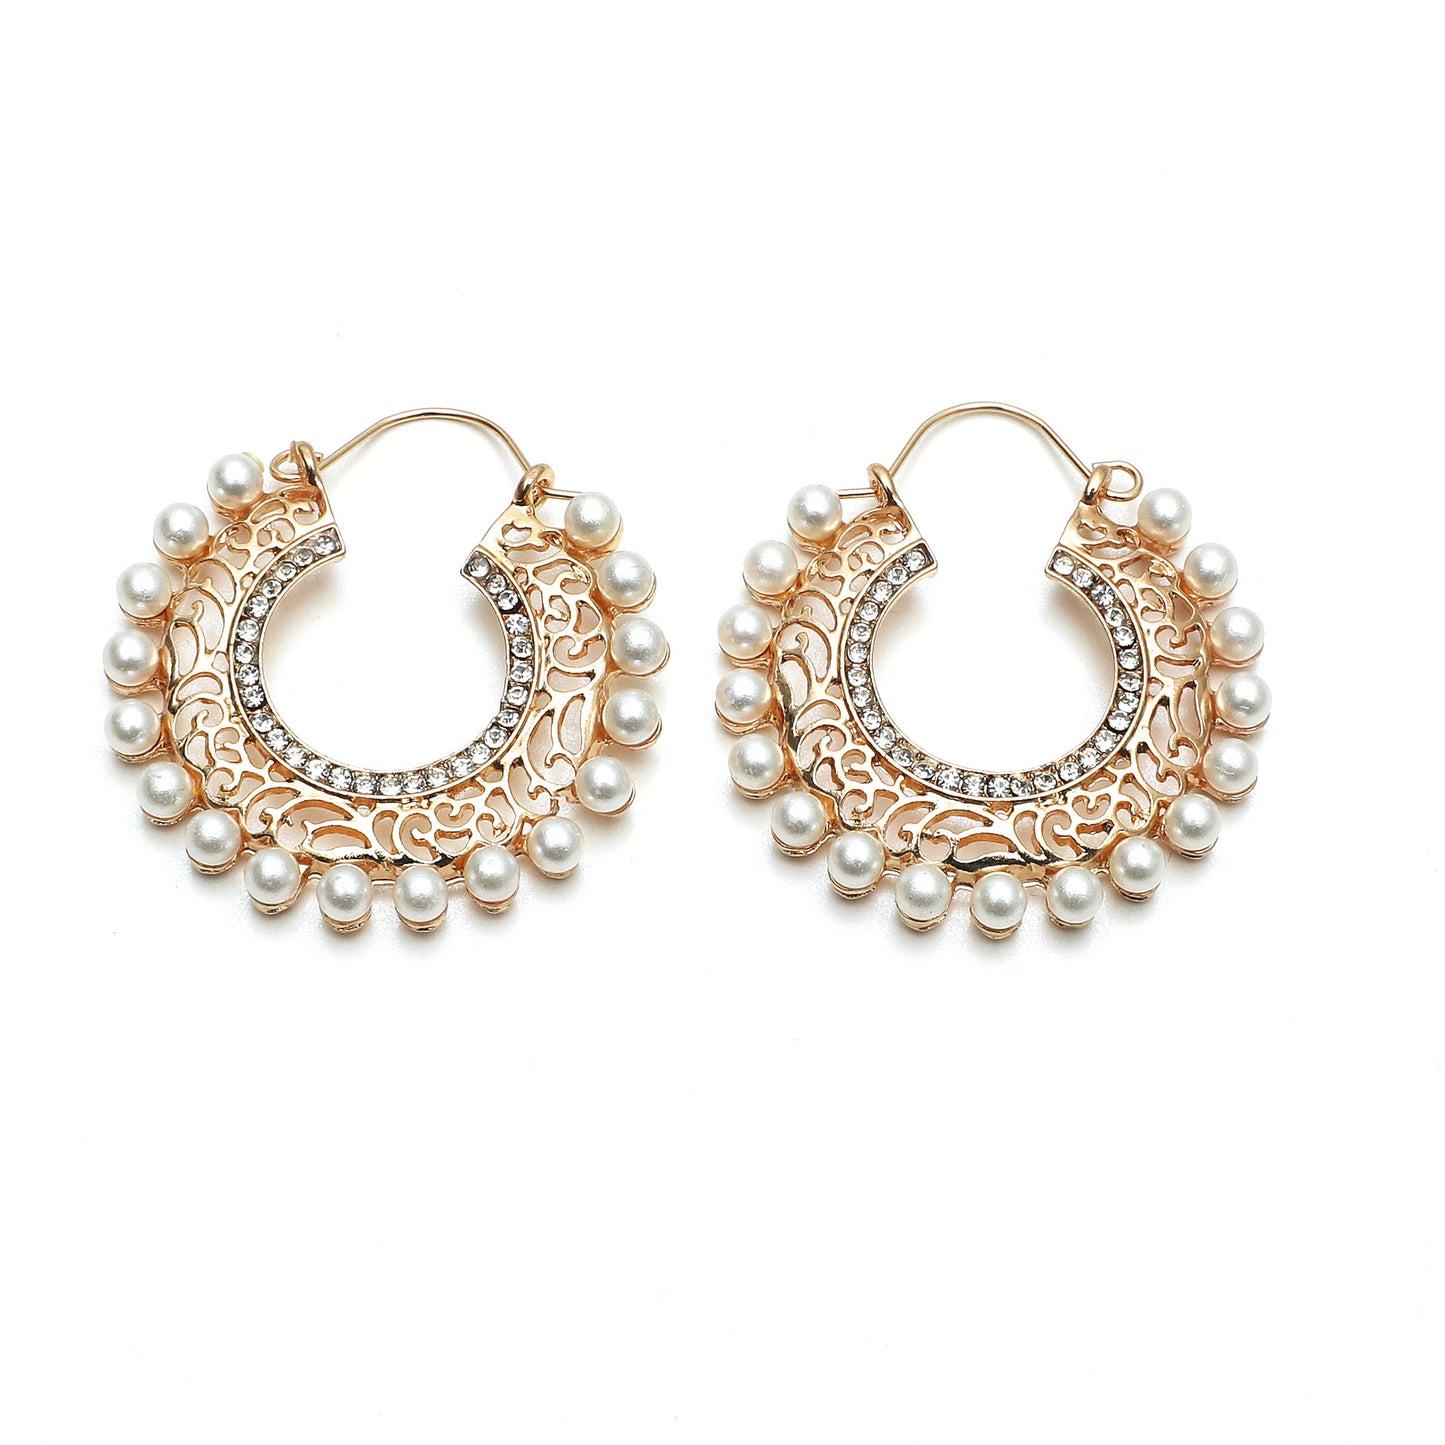 Retro Palace Style Carved Pearl Earrings